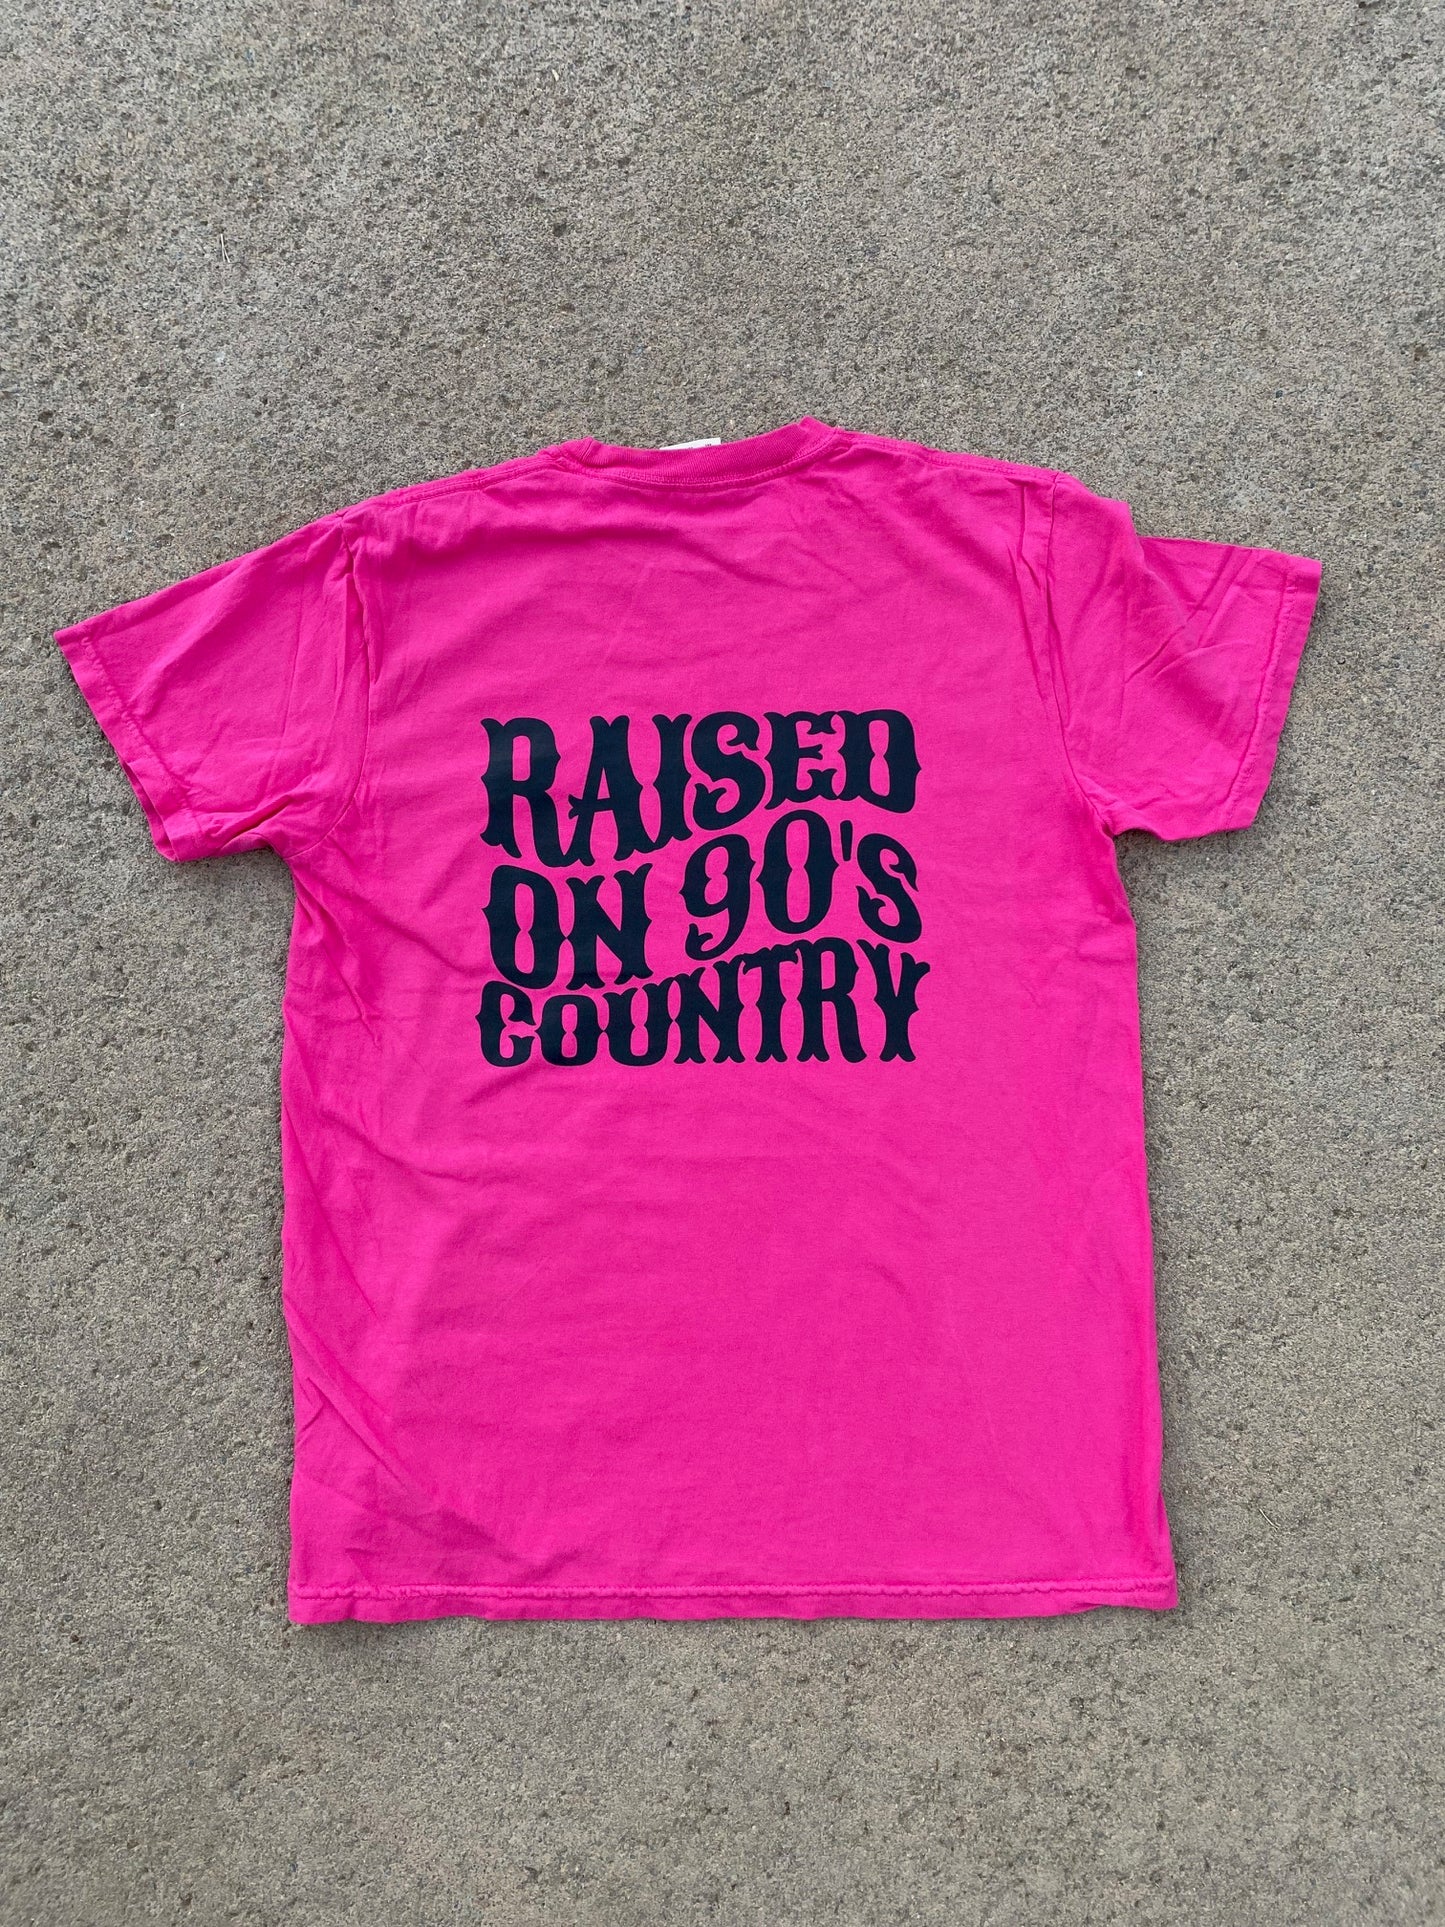 Raised on 90s Country Bright Pink T-Shirt